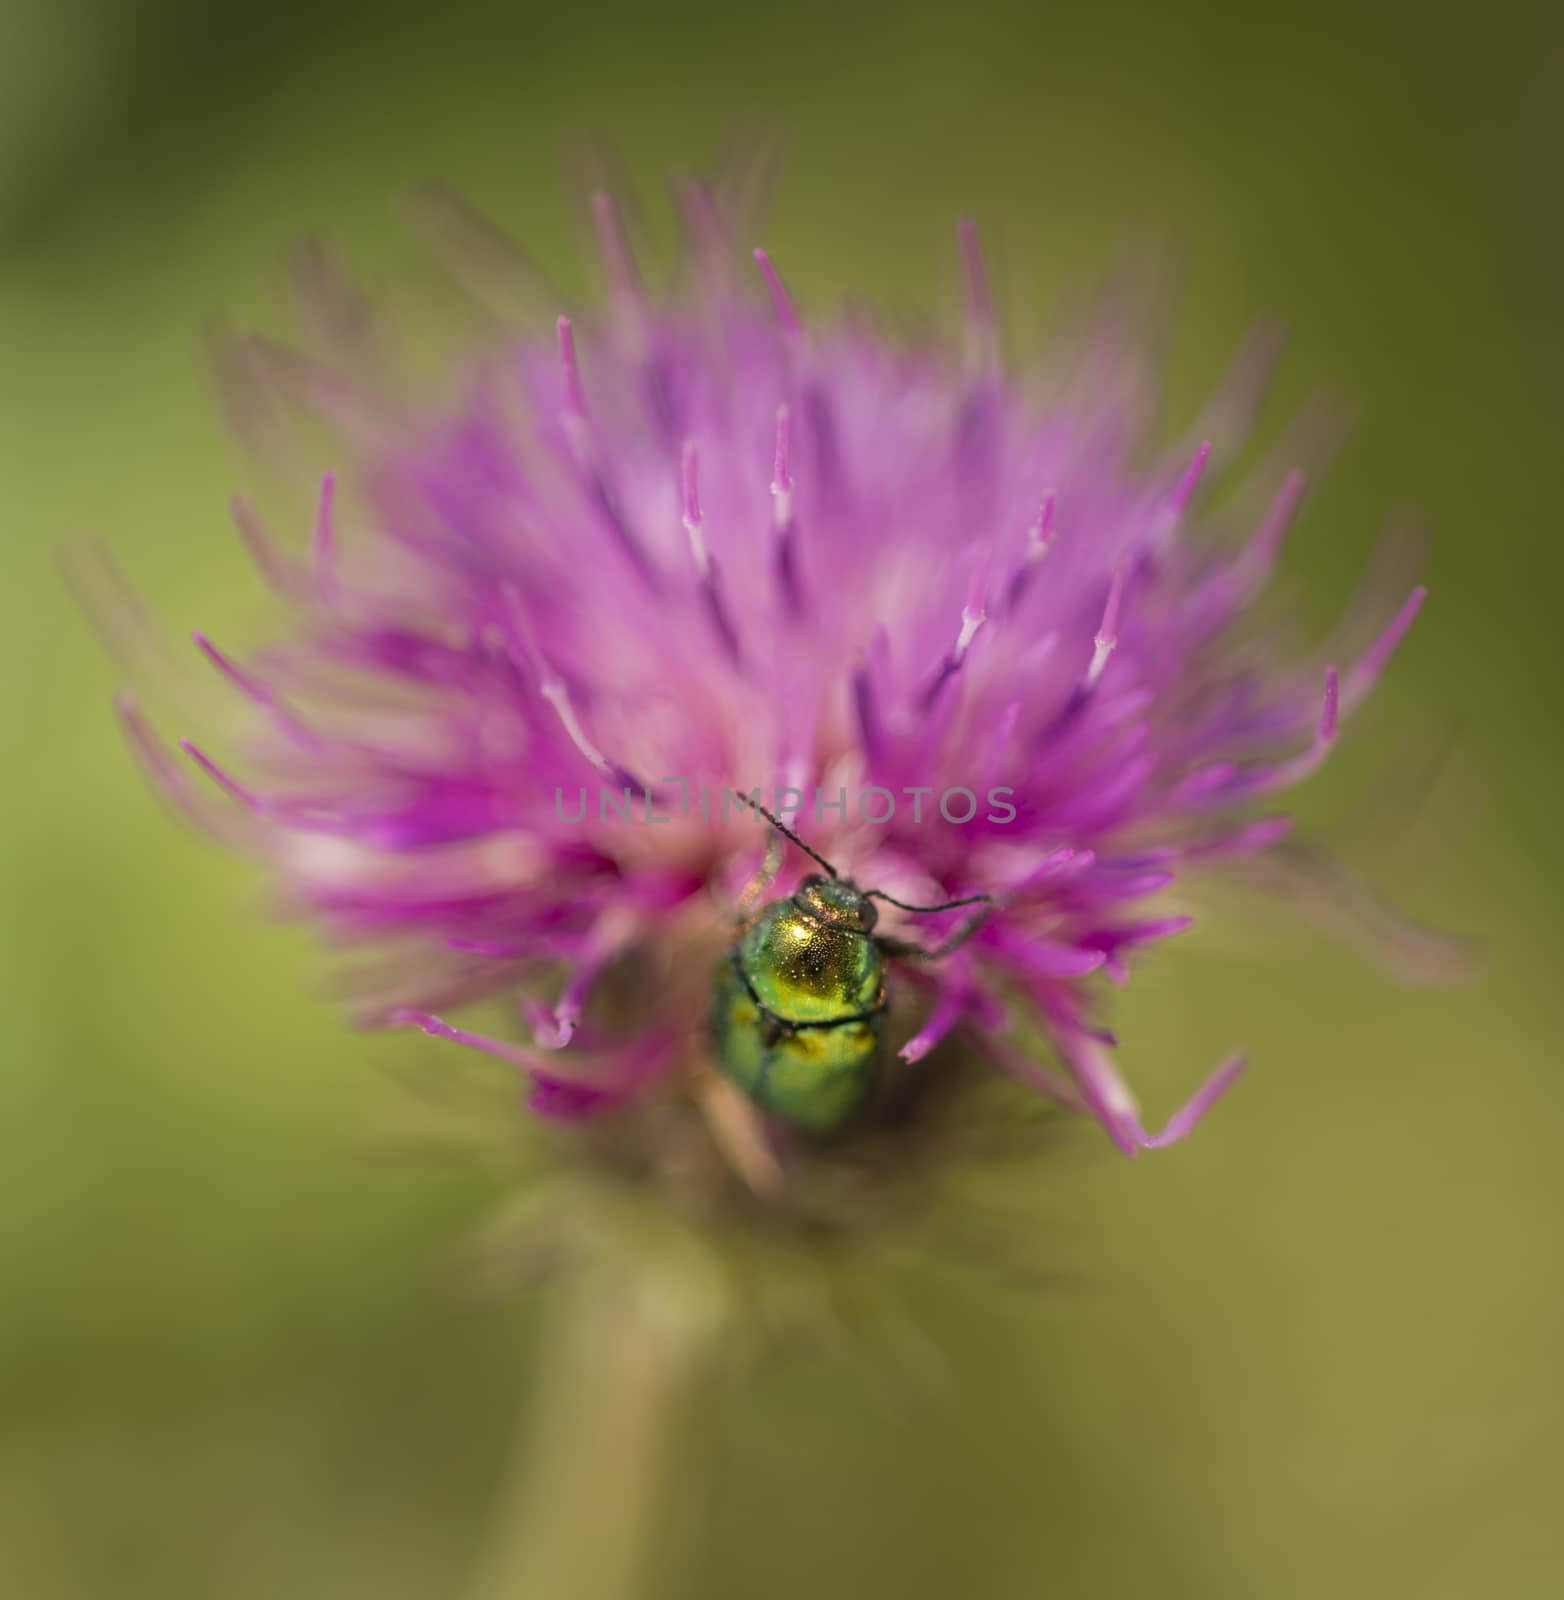 Bright green jewel coleopteron insect on pink clover flower